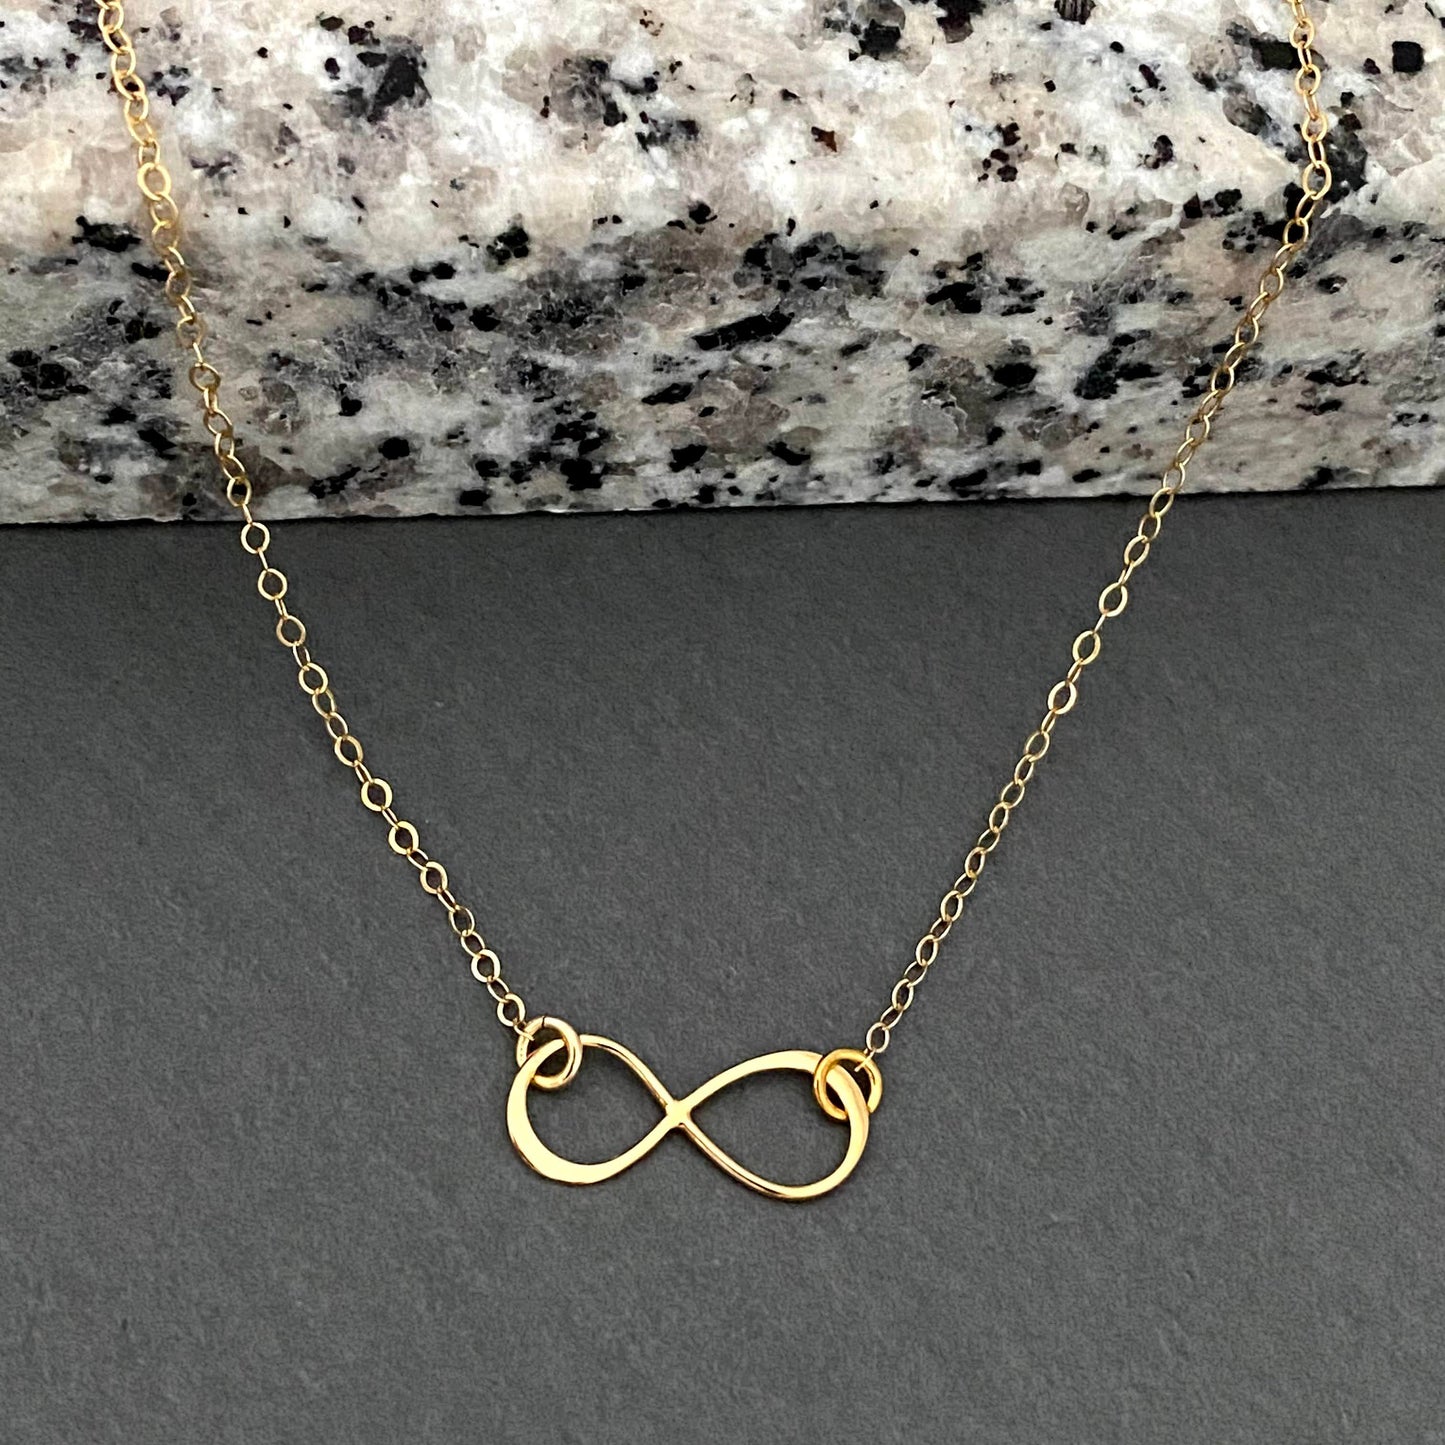 Infinity Heart charm necklace